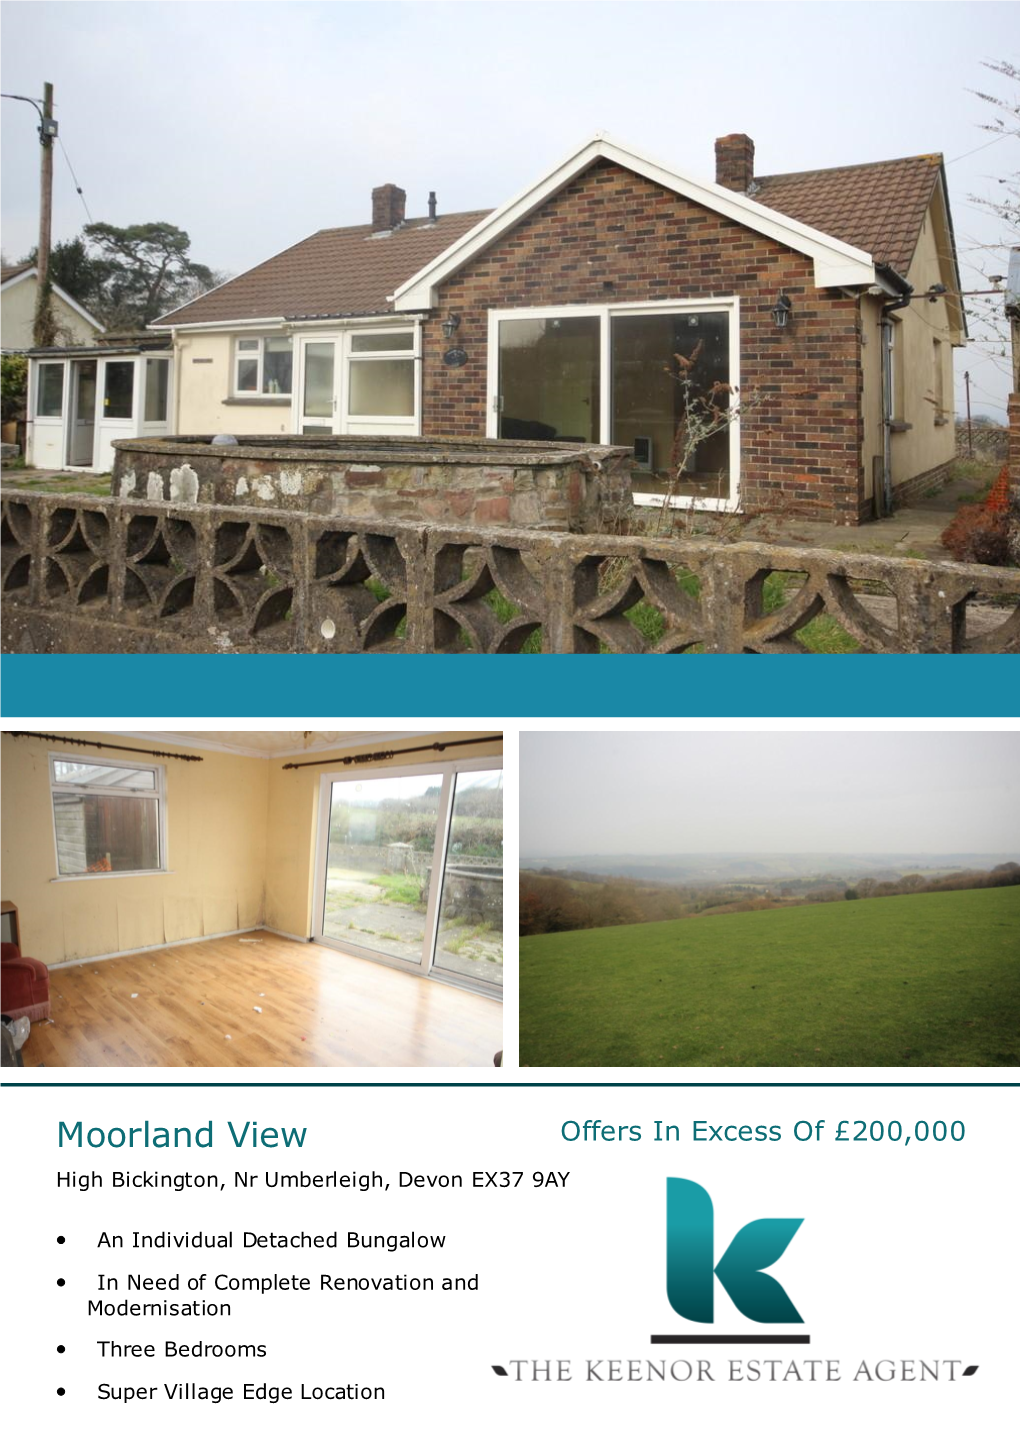 Moorland View Offers in Excess of £200,000 High Bickington, Nr Umberleigh, Devon EX37 9AY